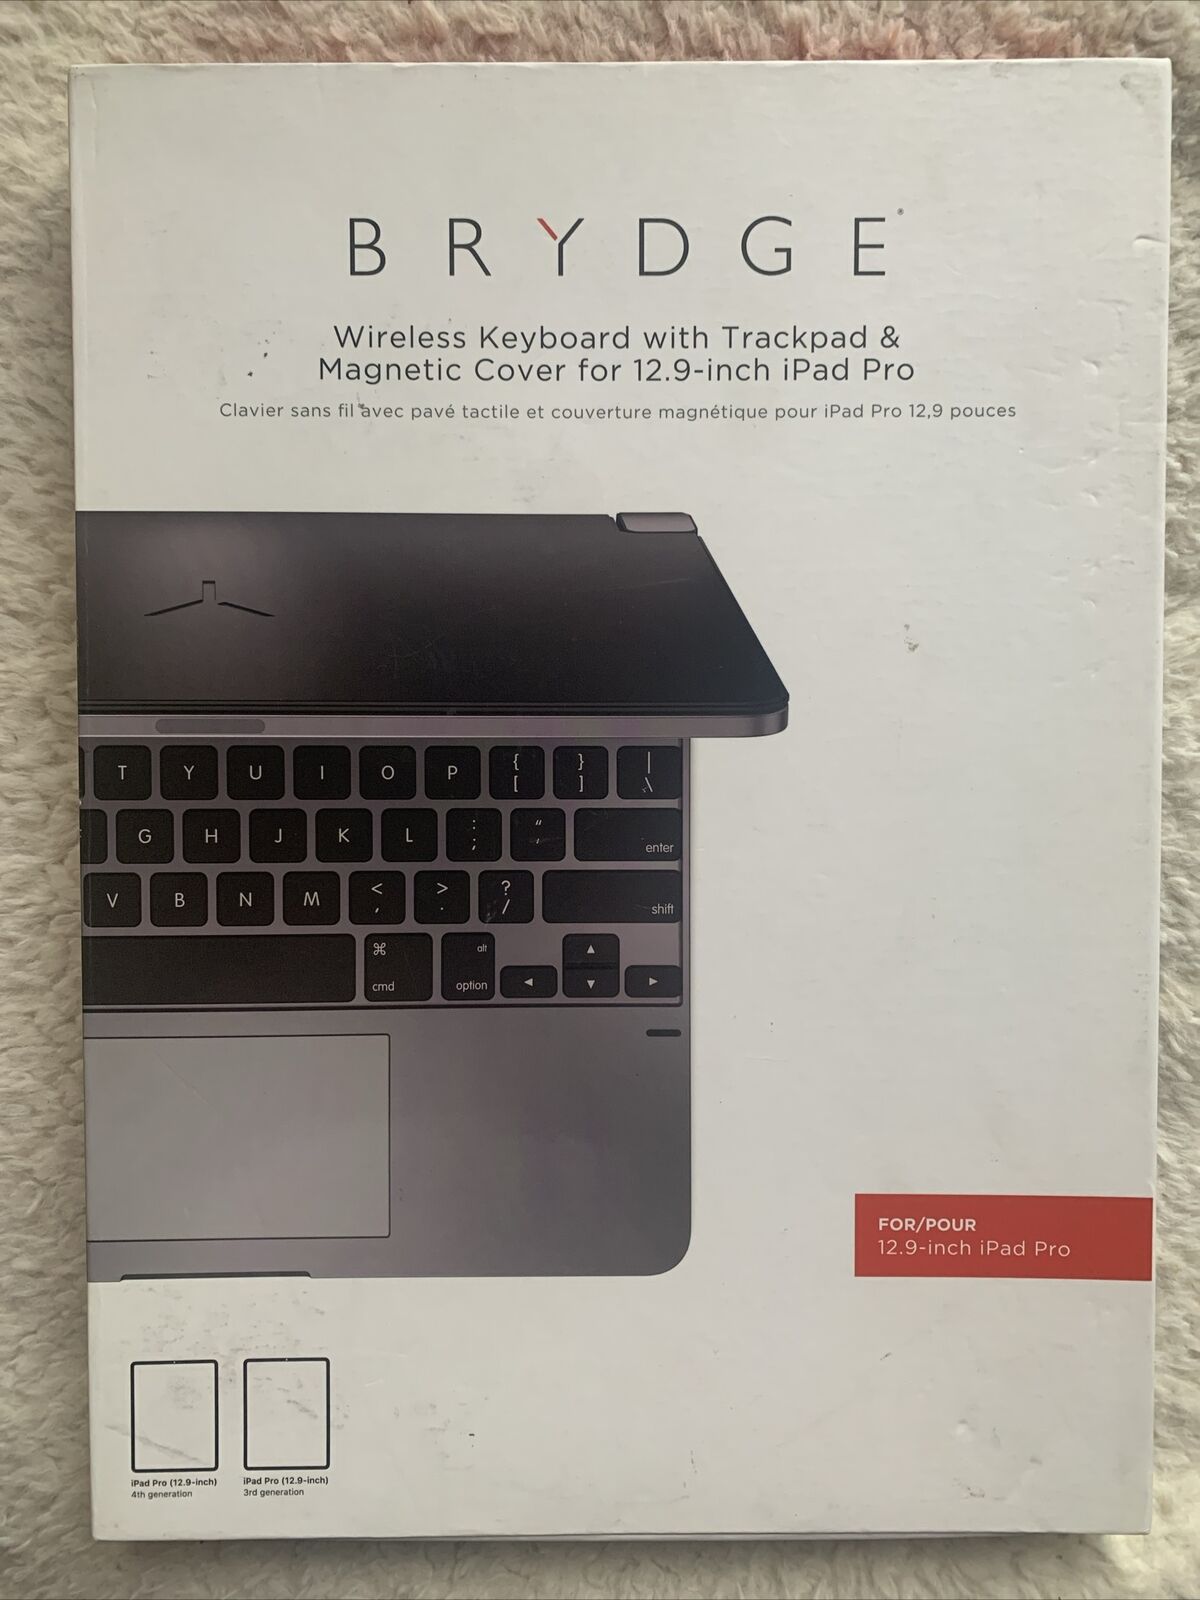 Brydge Wireless Keyboard for iPad Pro 12.9-inch with Trackpad & Magnetic Cover